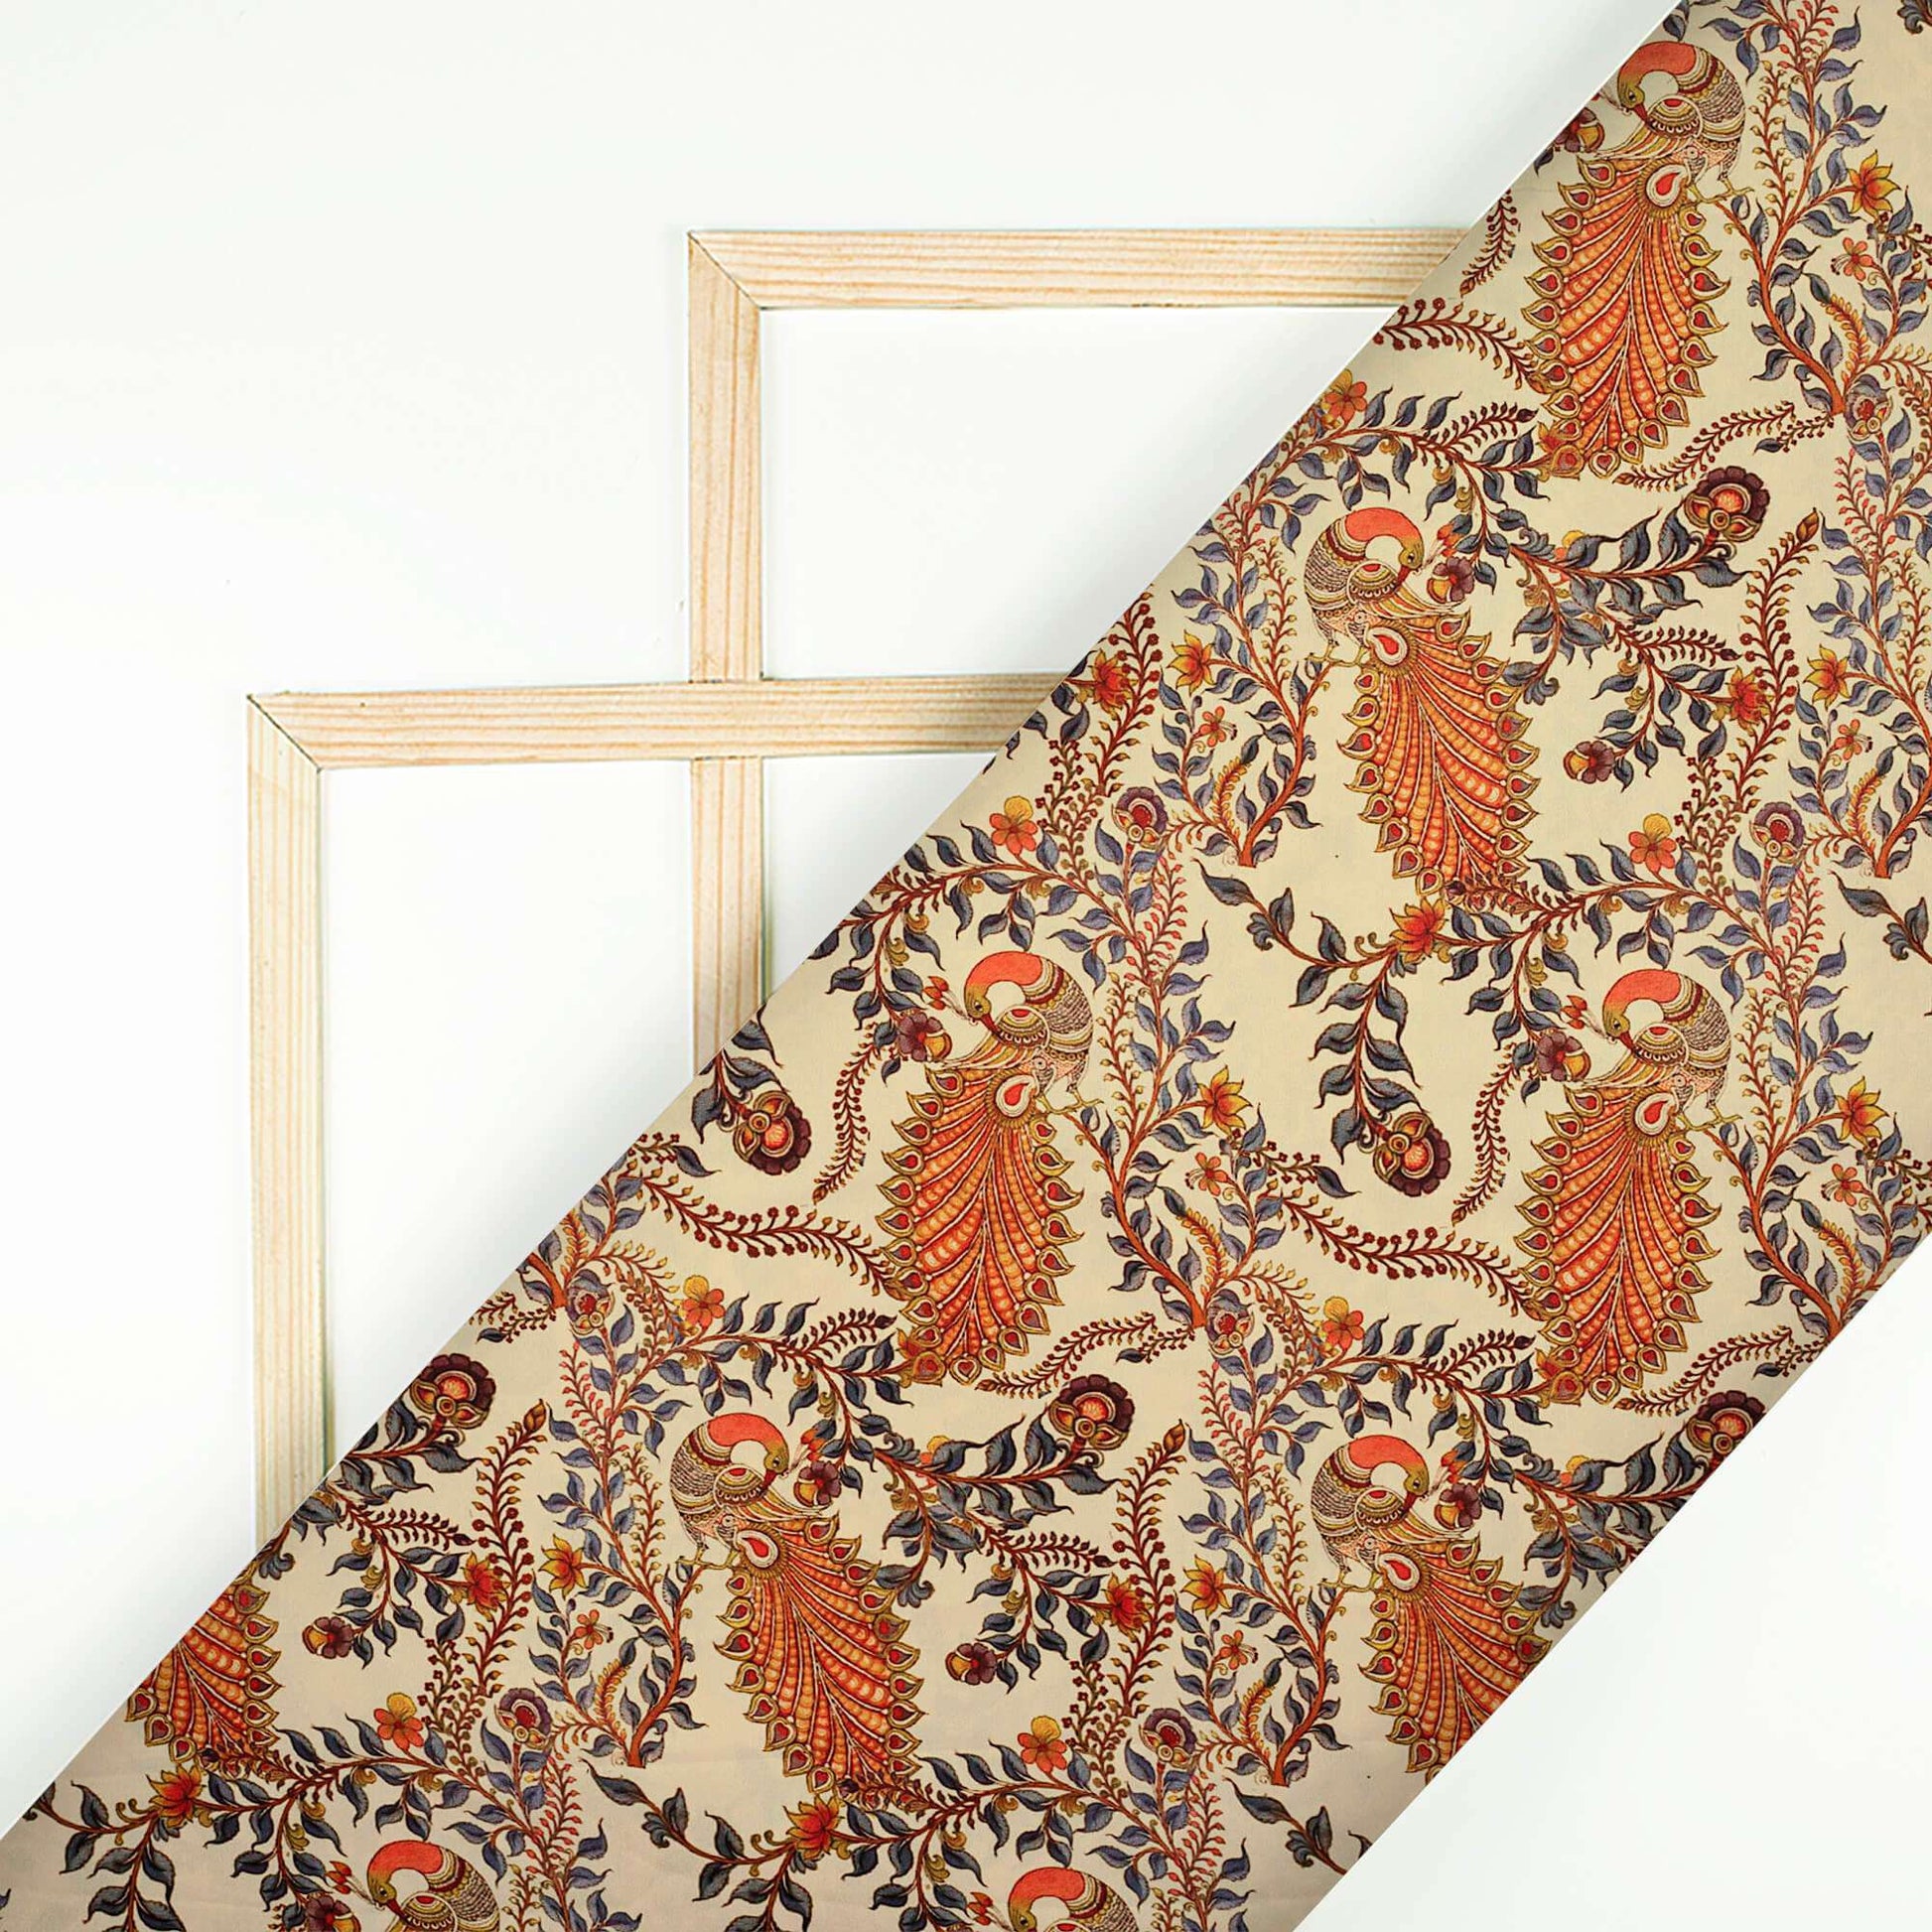 Ivory Cream And Orange Peacock Feather Pattern Digital Print Ultra Premium Butter Crepe Fabric - Fabcurate